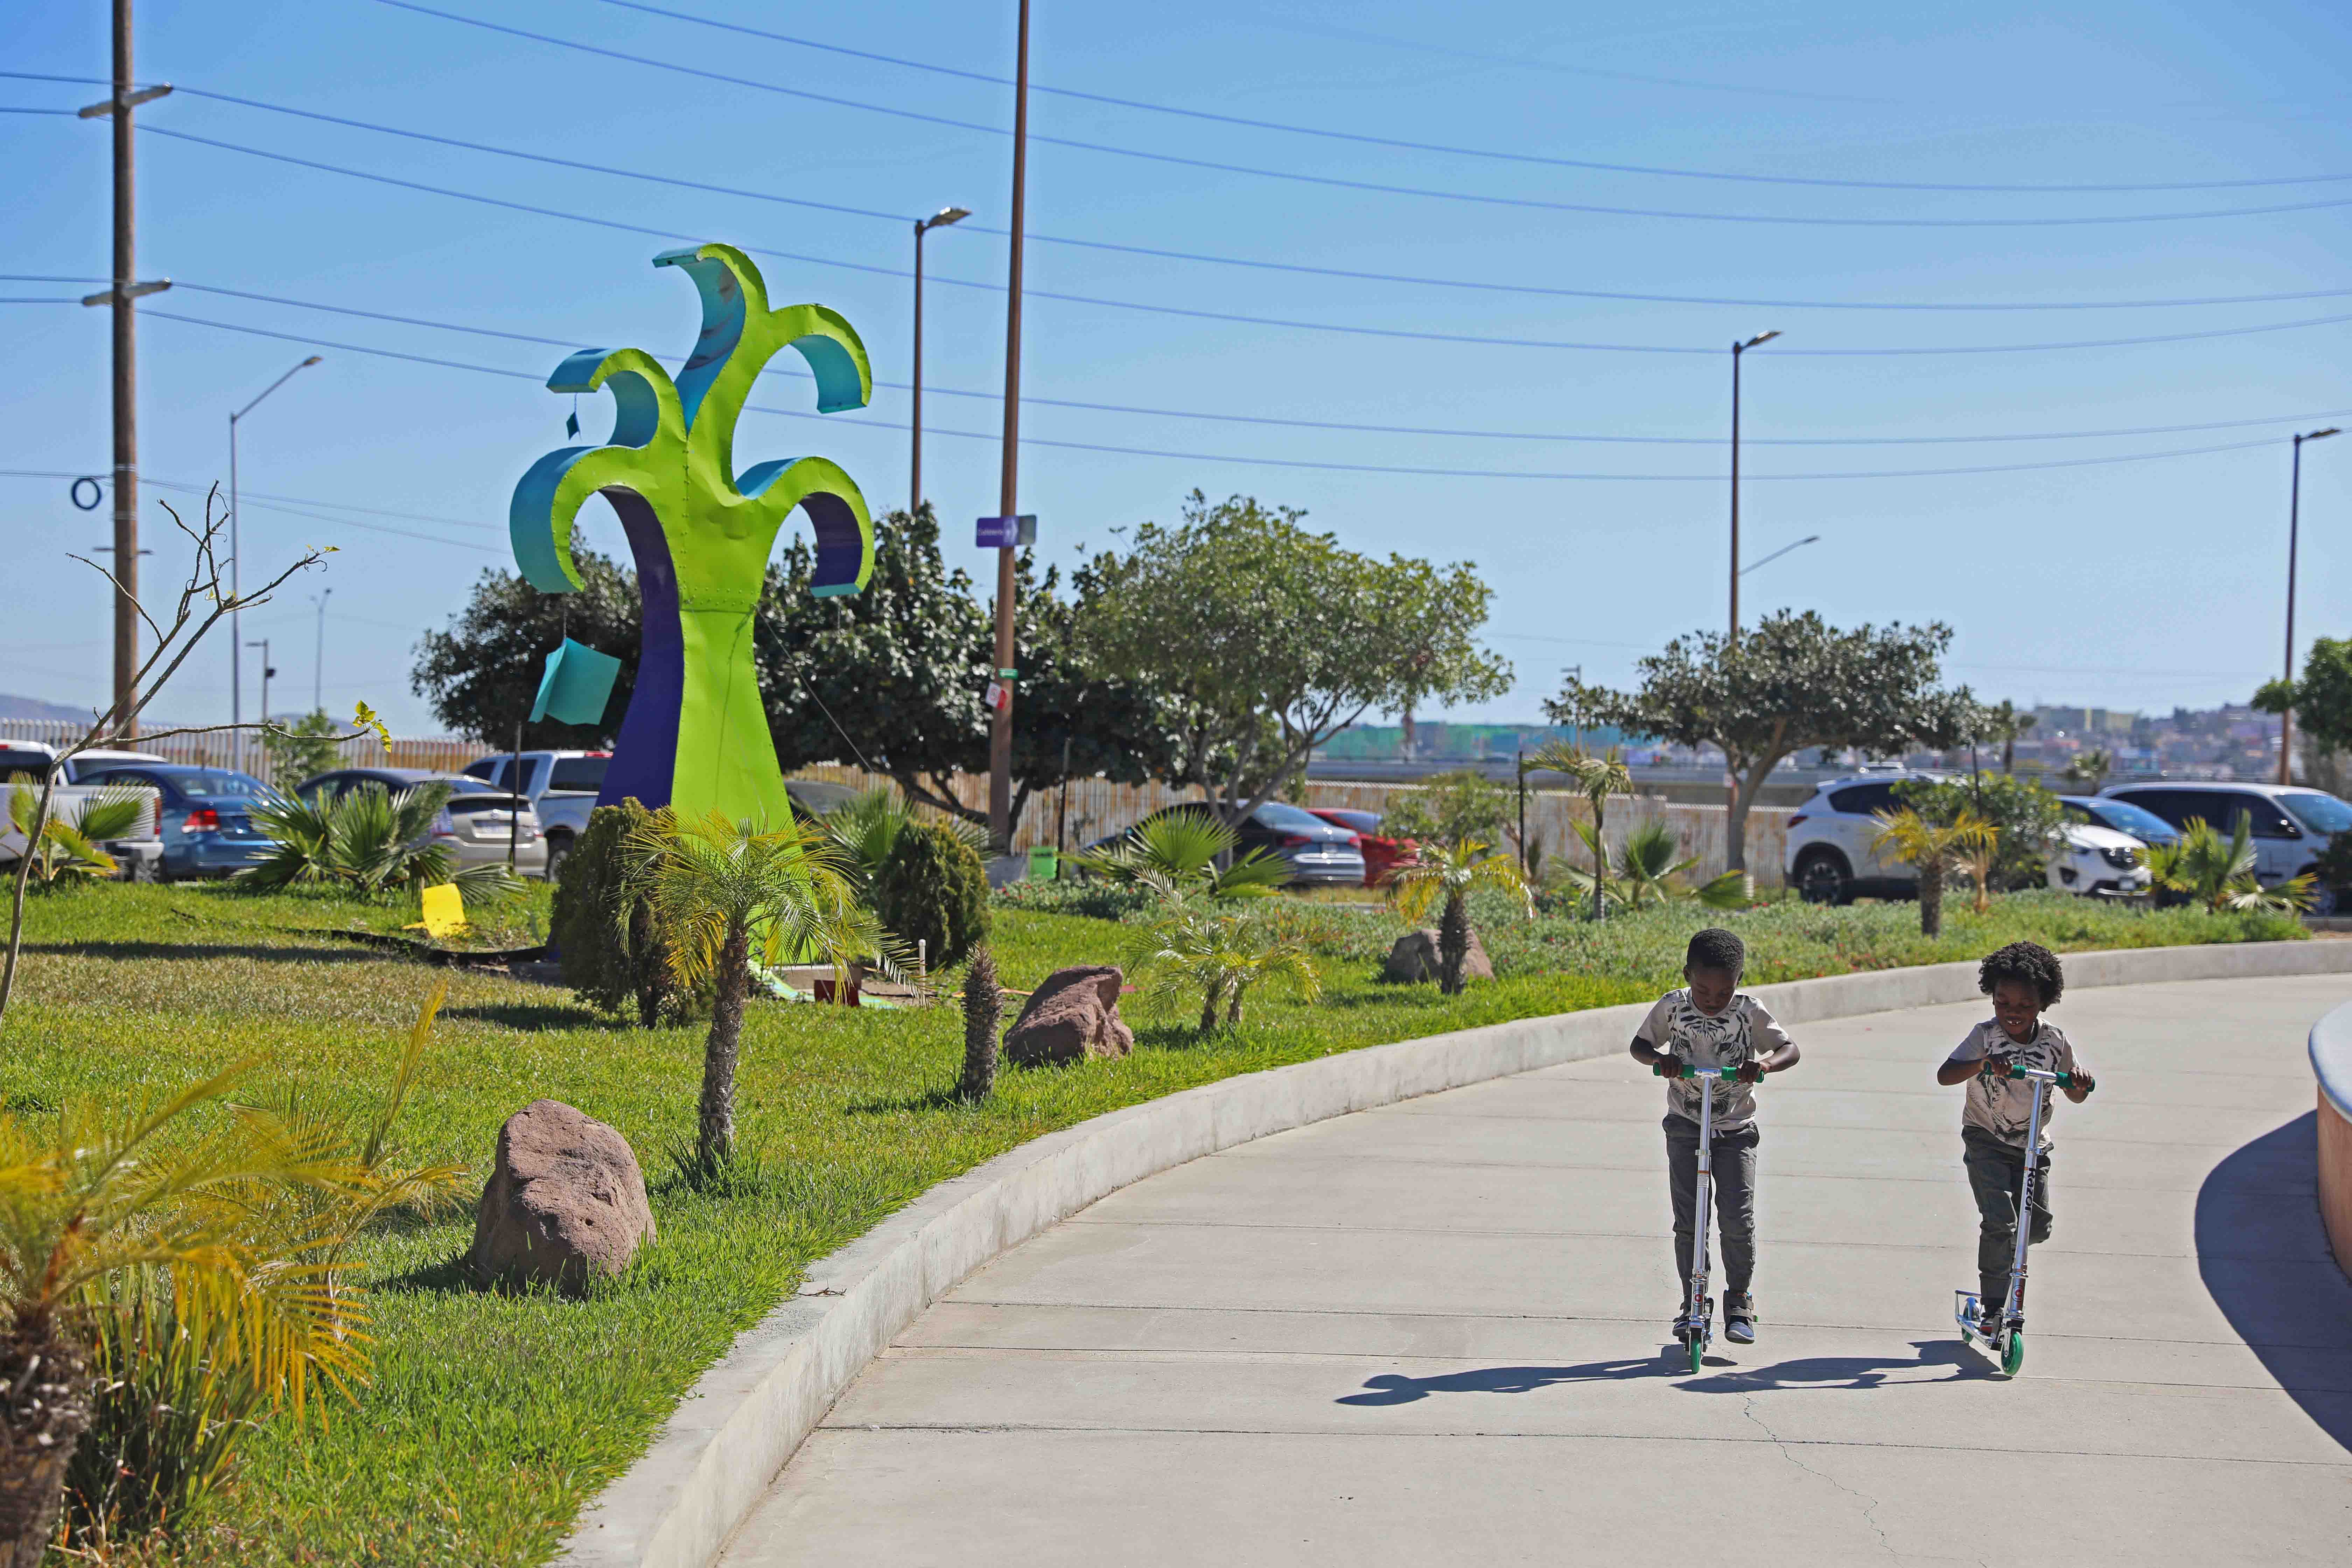 Two boys riding scooters past a piece of public art in Tijuana